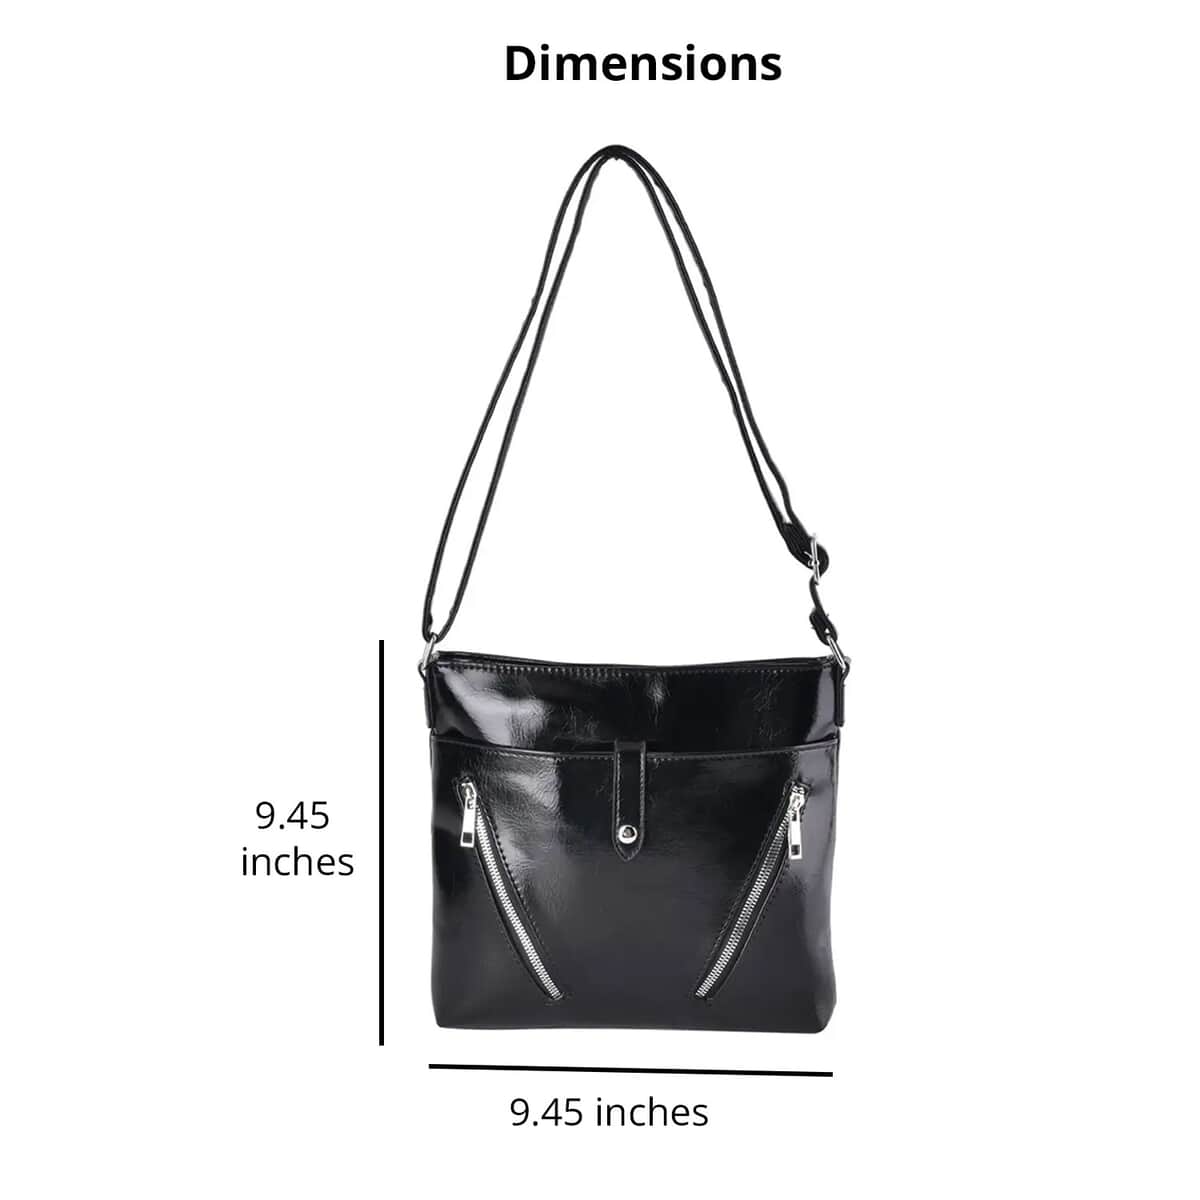 Buy Black Faux Leather Crossbody Bag with Shoulder Strap at ShopLC.